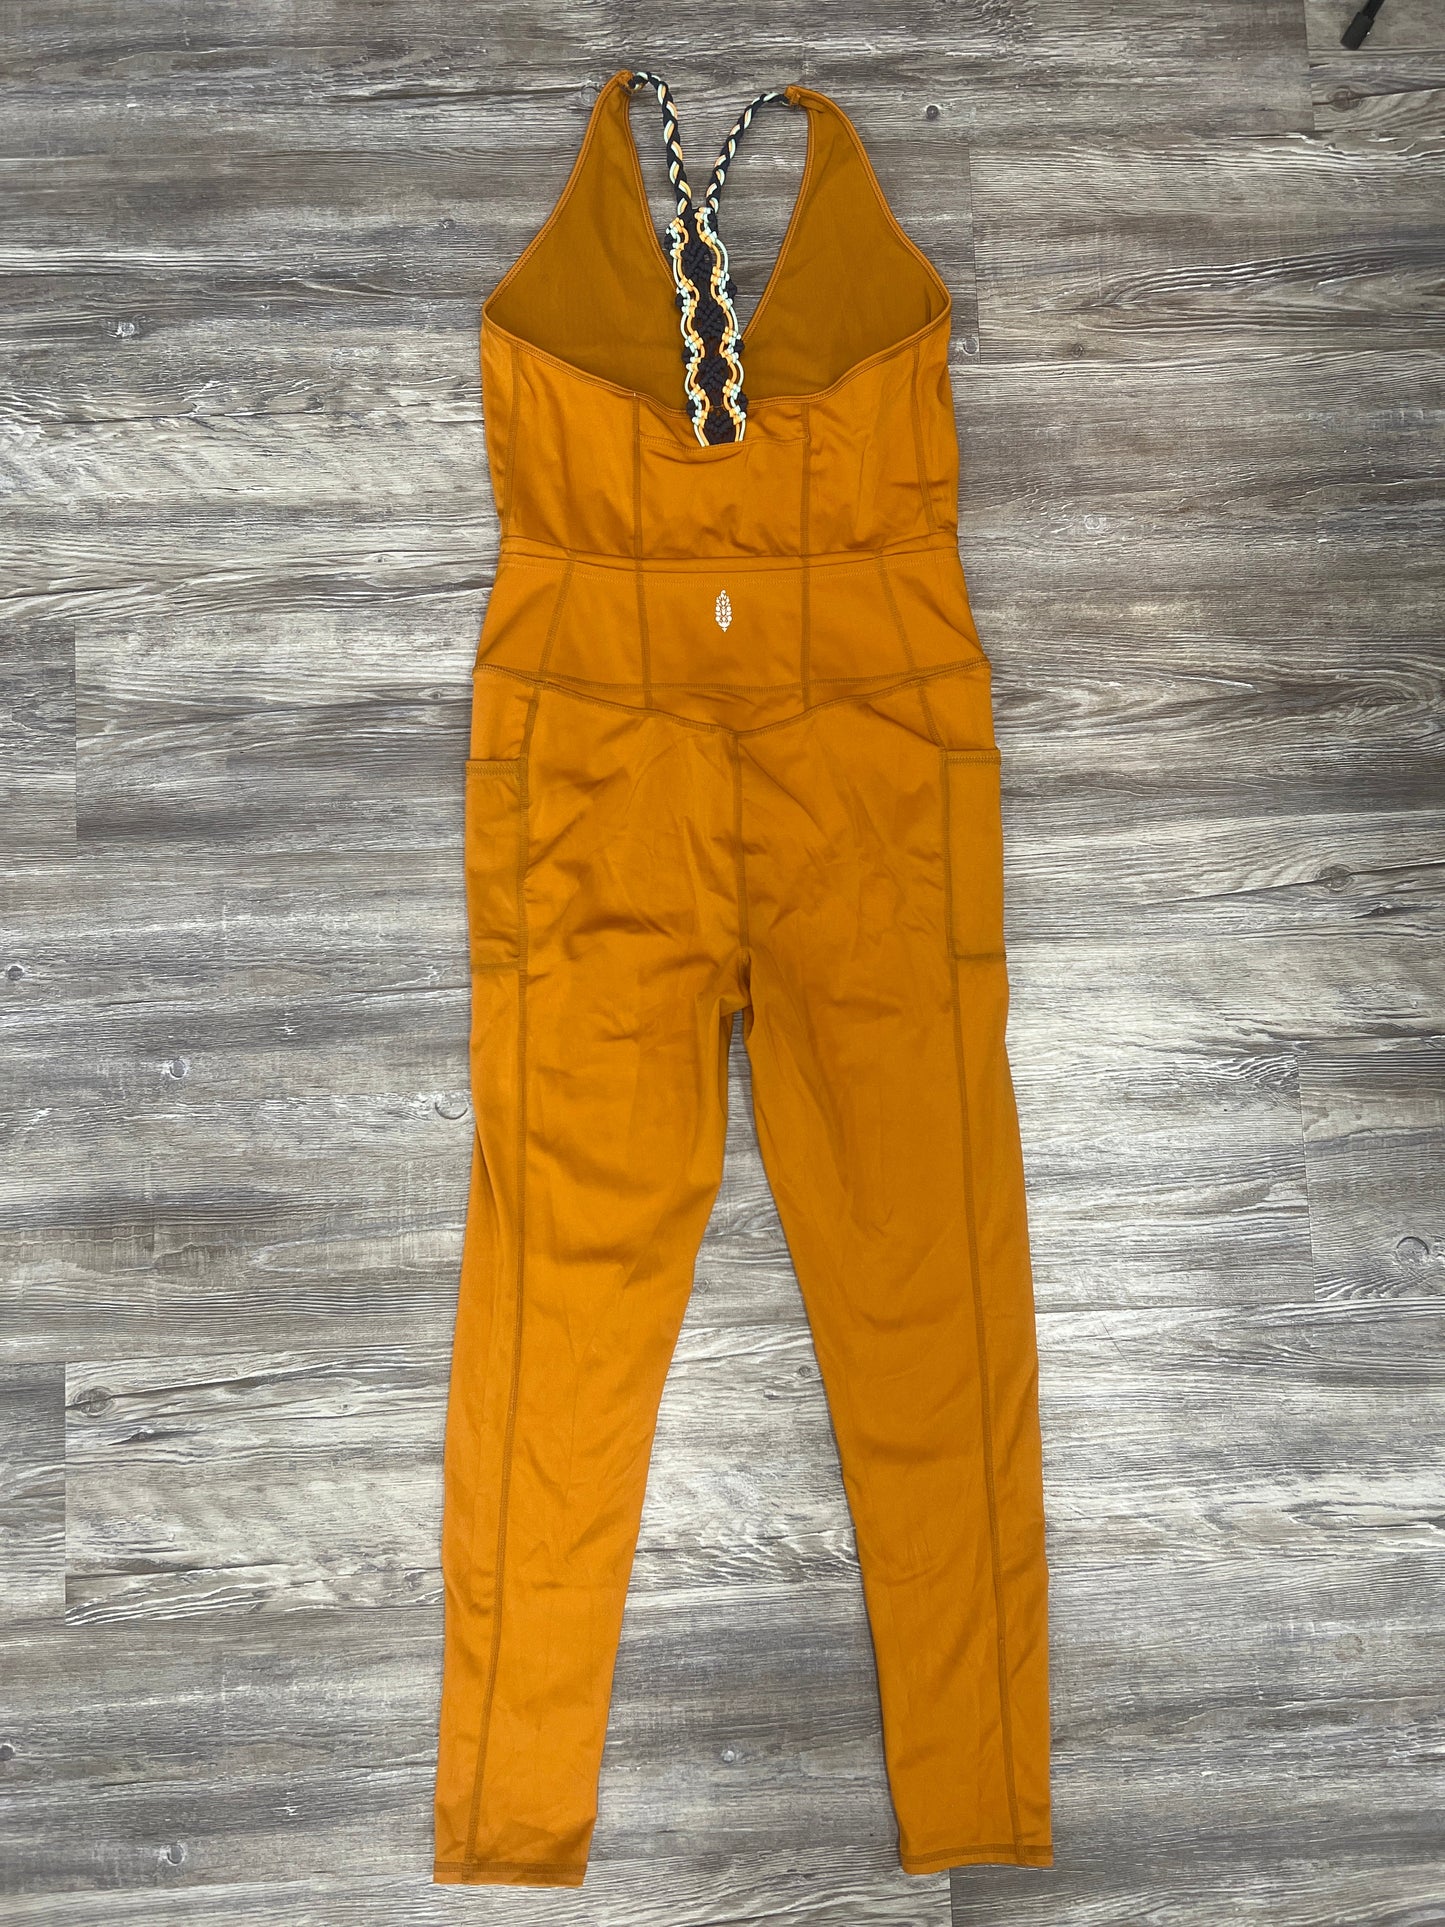 Yellow Jumpsuit Free People, Size M